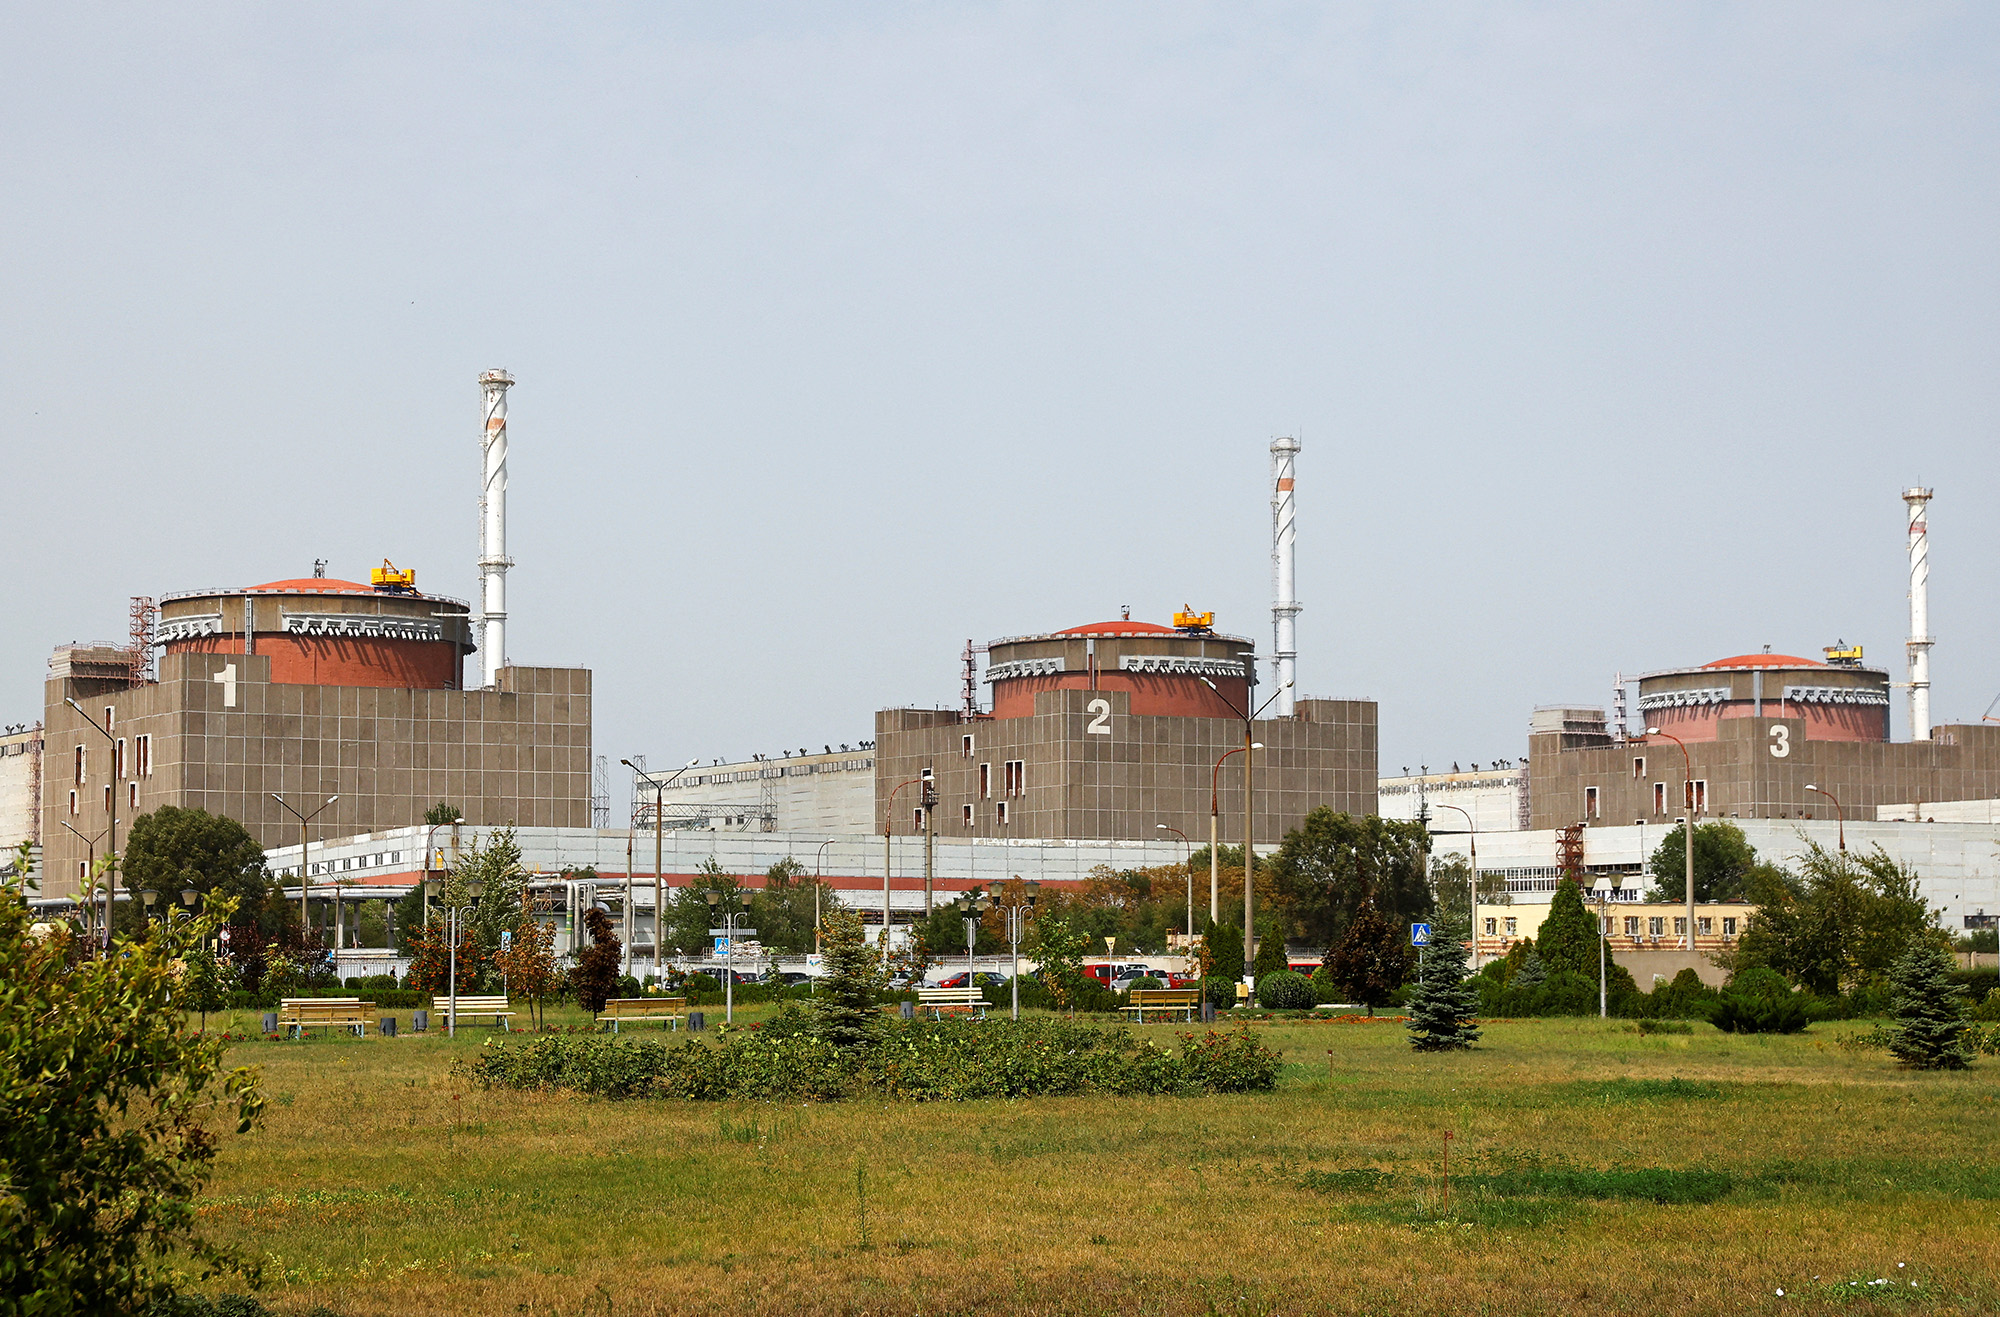 The Zaporizhzhia nuclear power plant outside the Russian-controlled city of Enerhodar, Ukraine, on August 22.